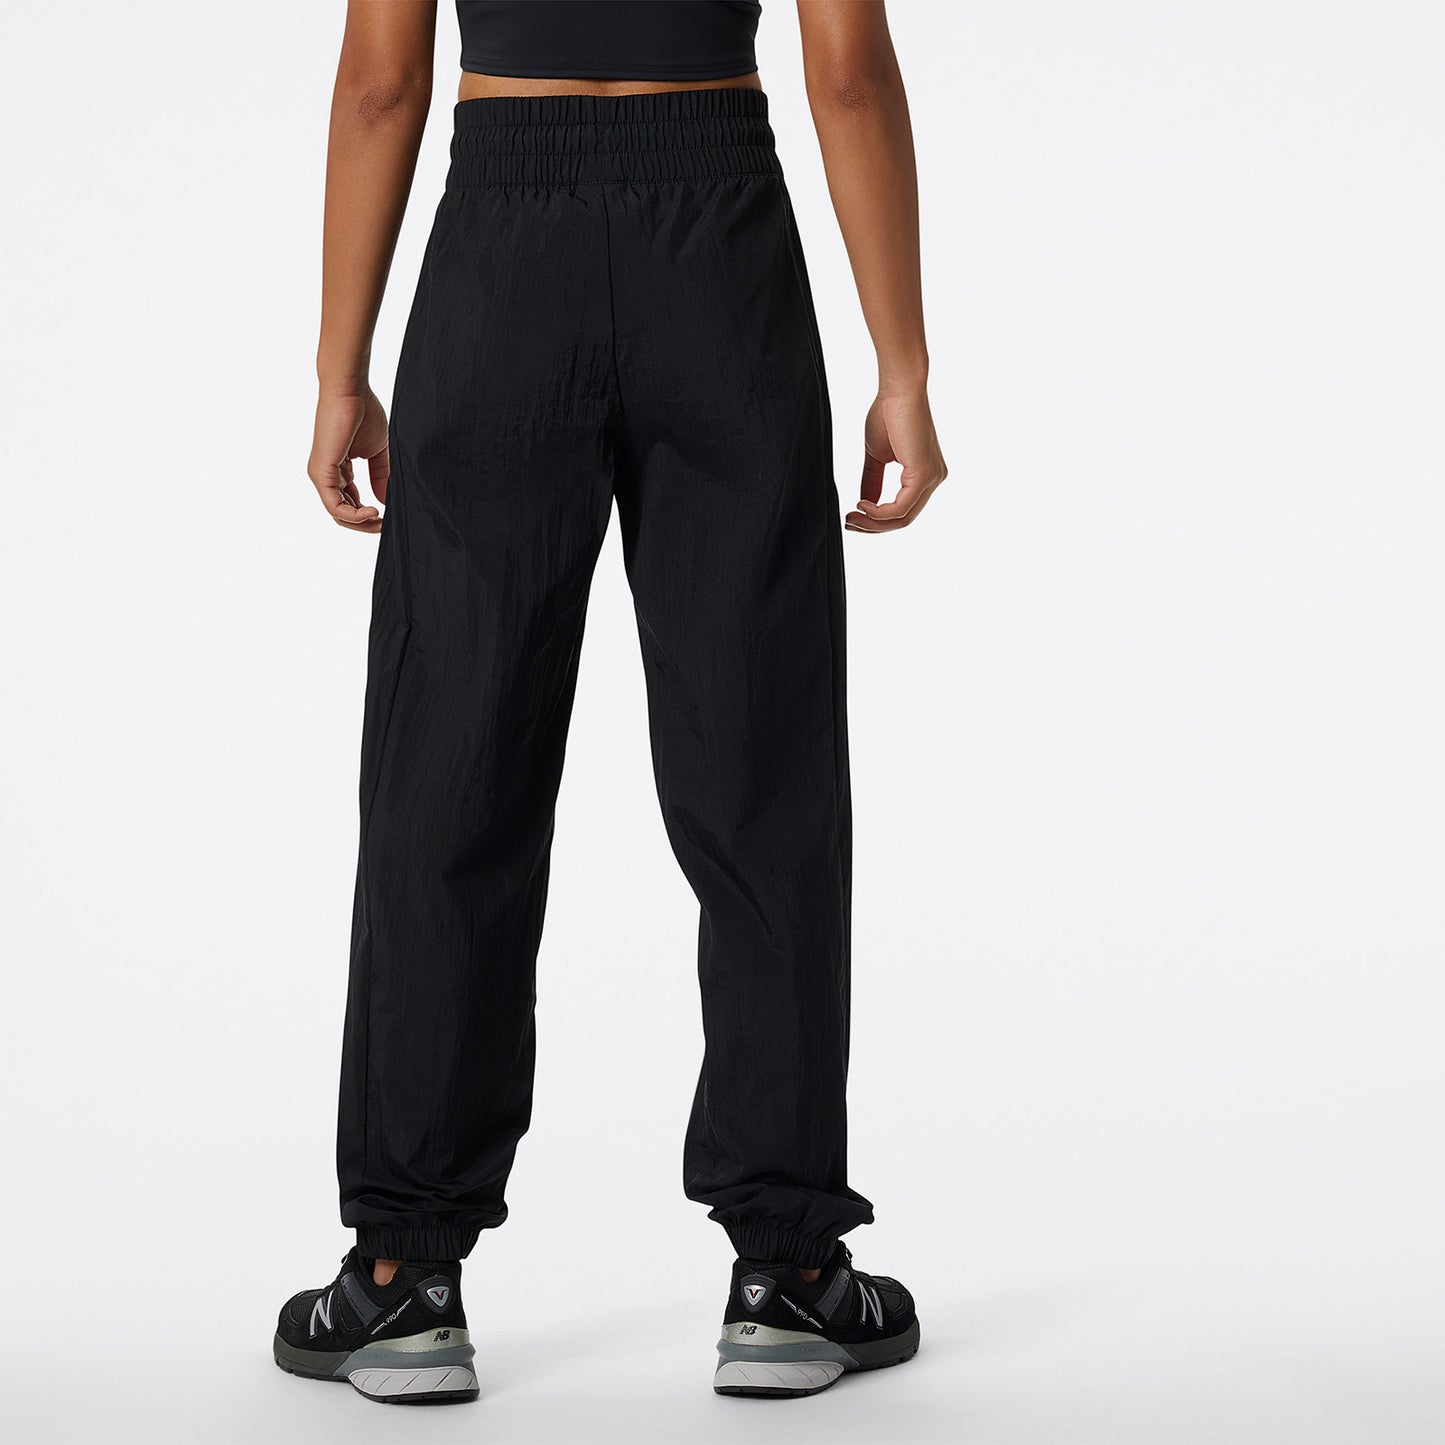 NB Athletics Amplified Woven Pant